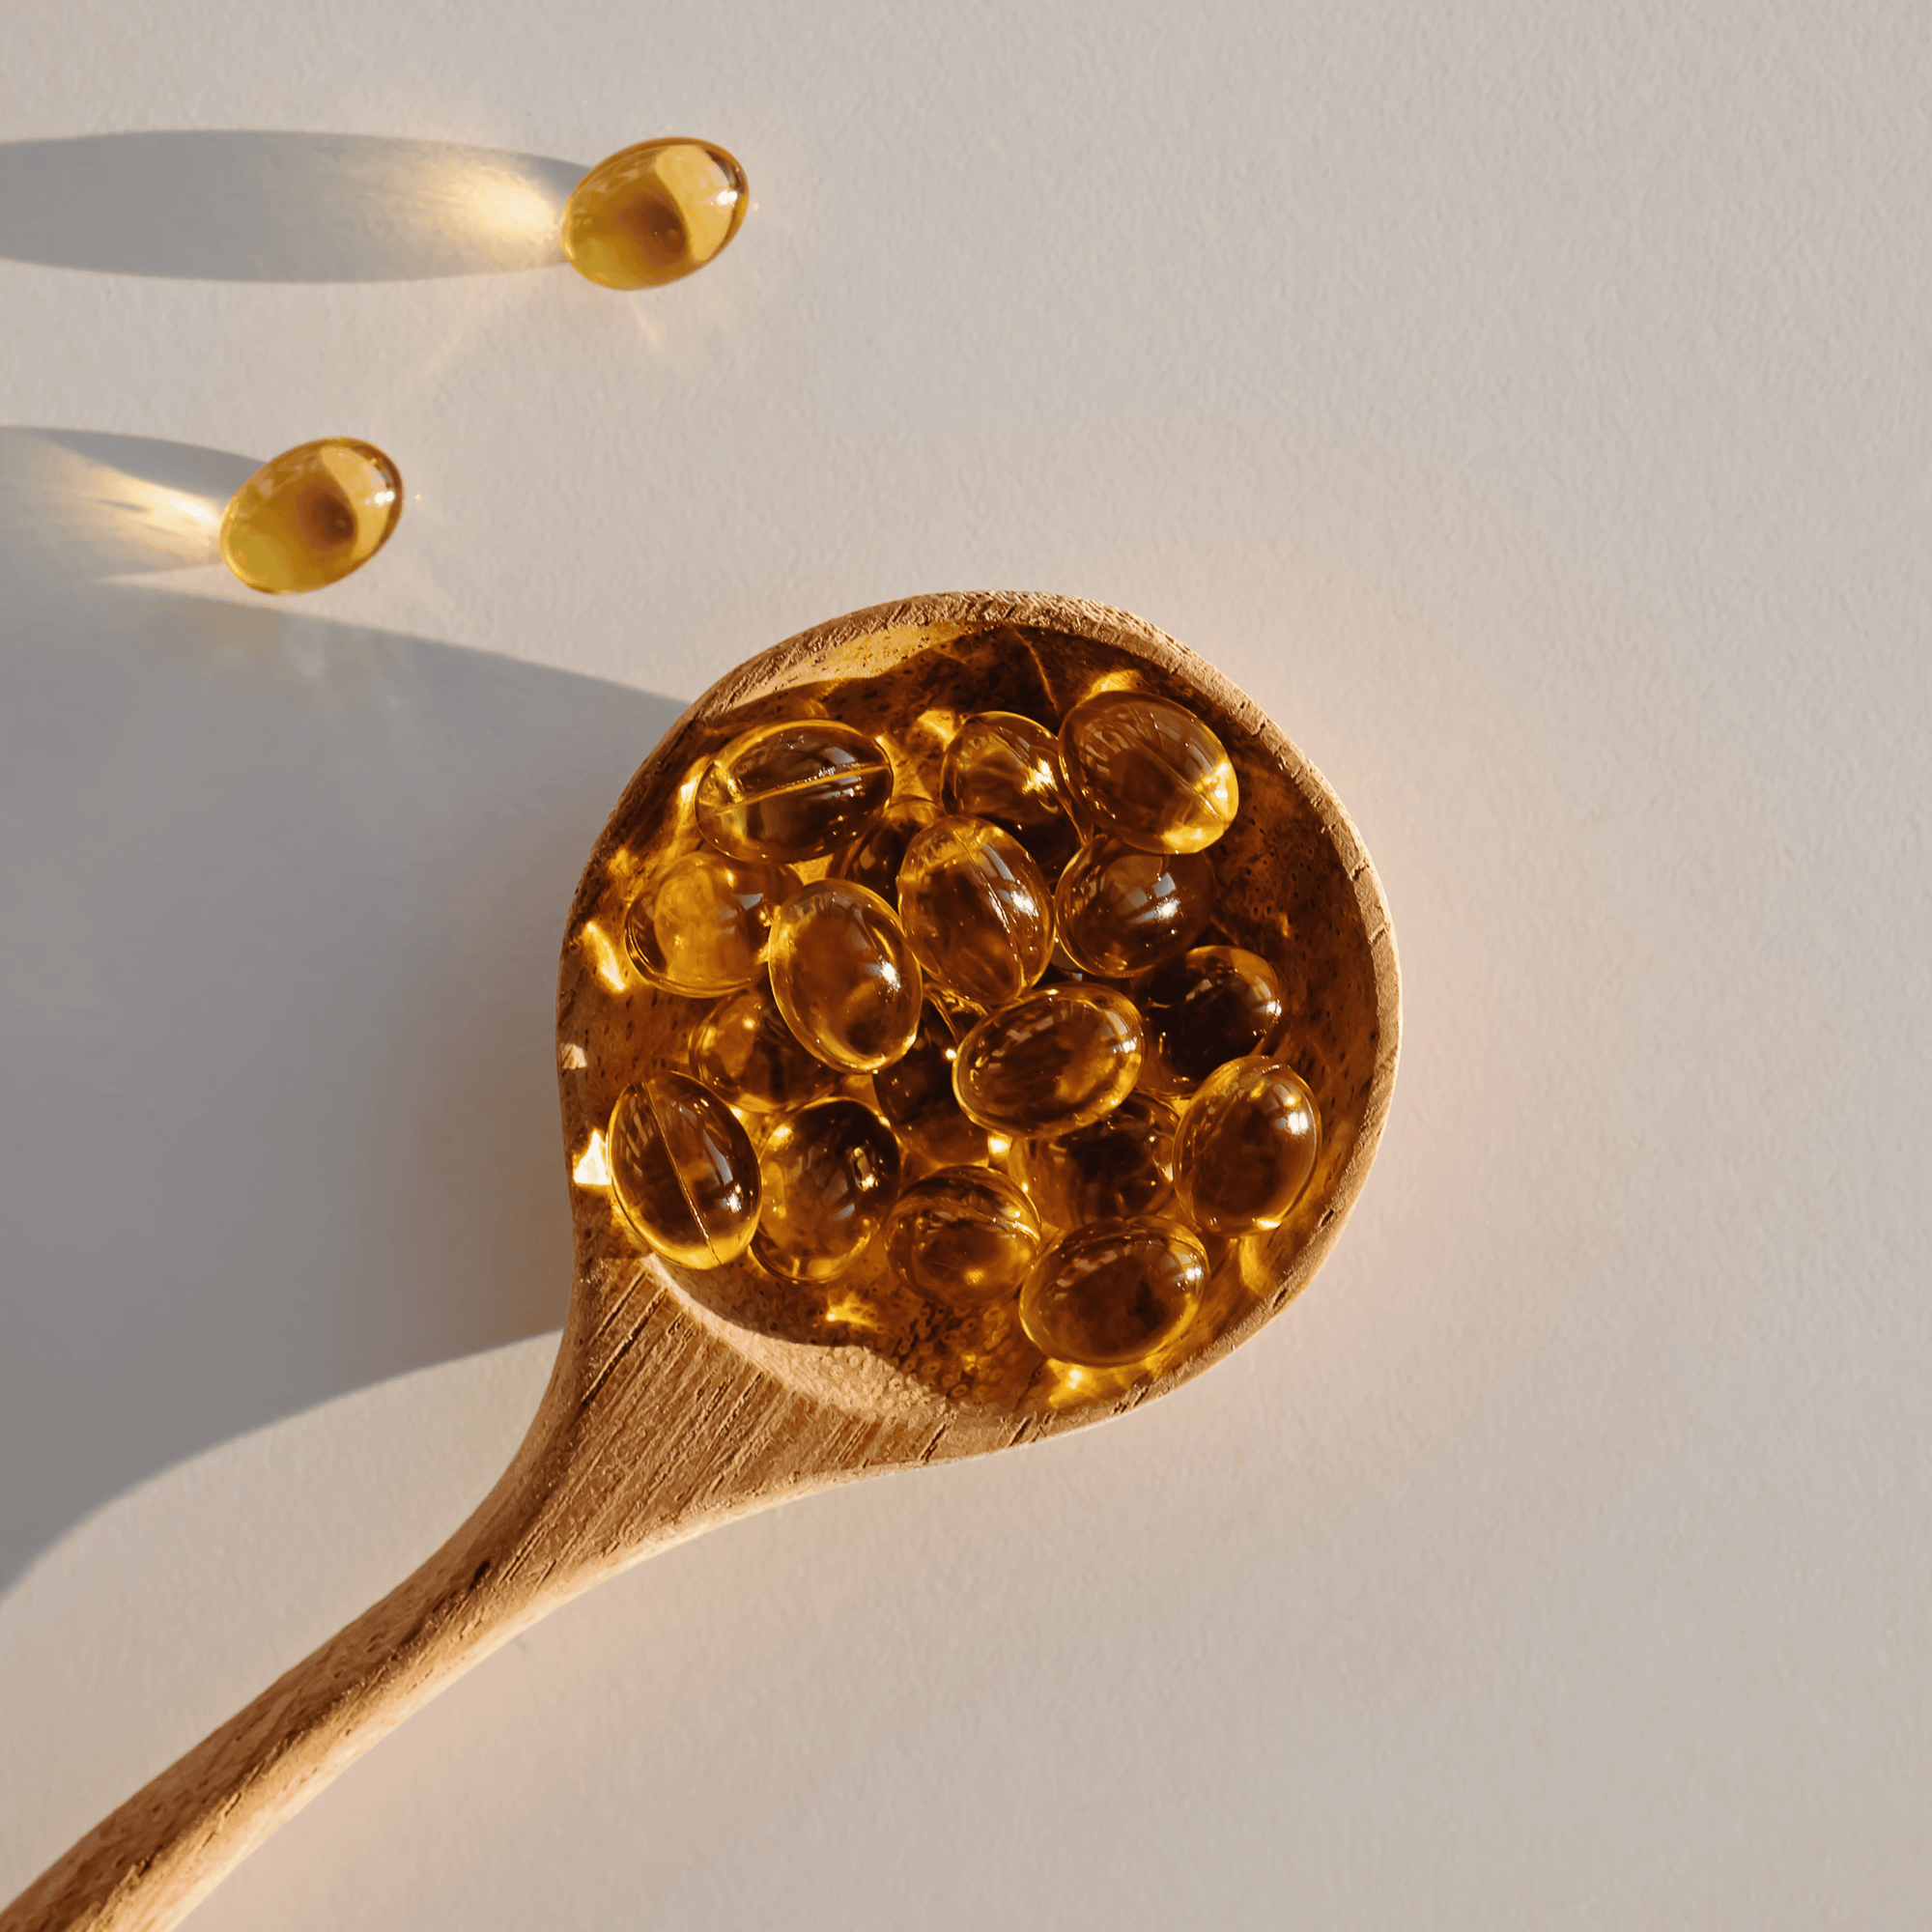 Can Supplements Cause Acne? Softgel supplement capsules in a wooden spoon on a beige background.